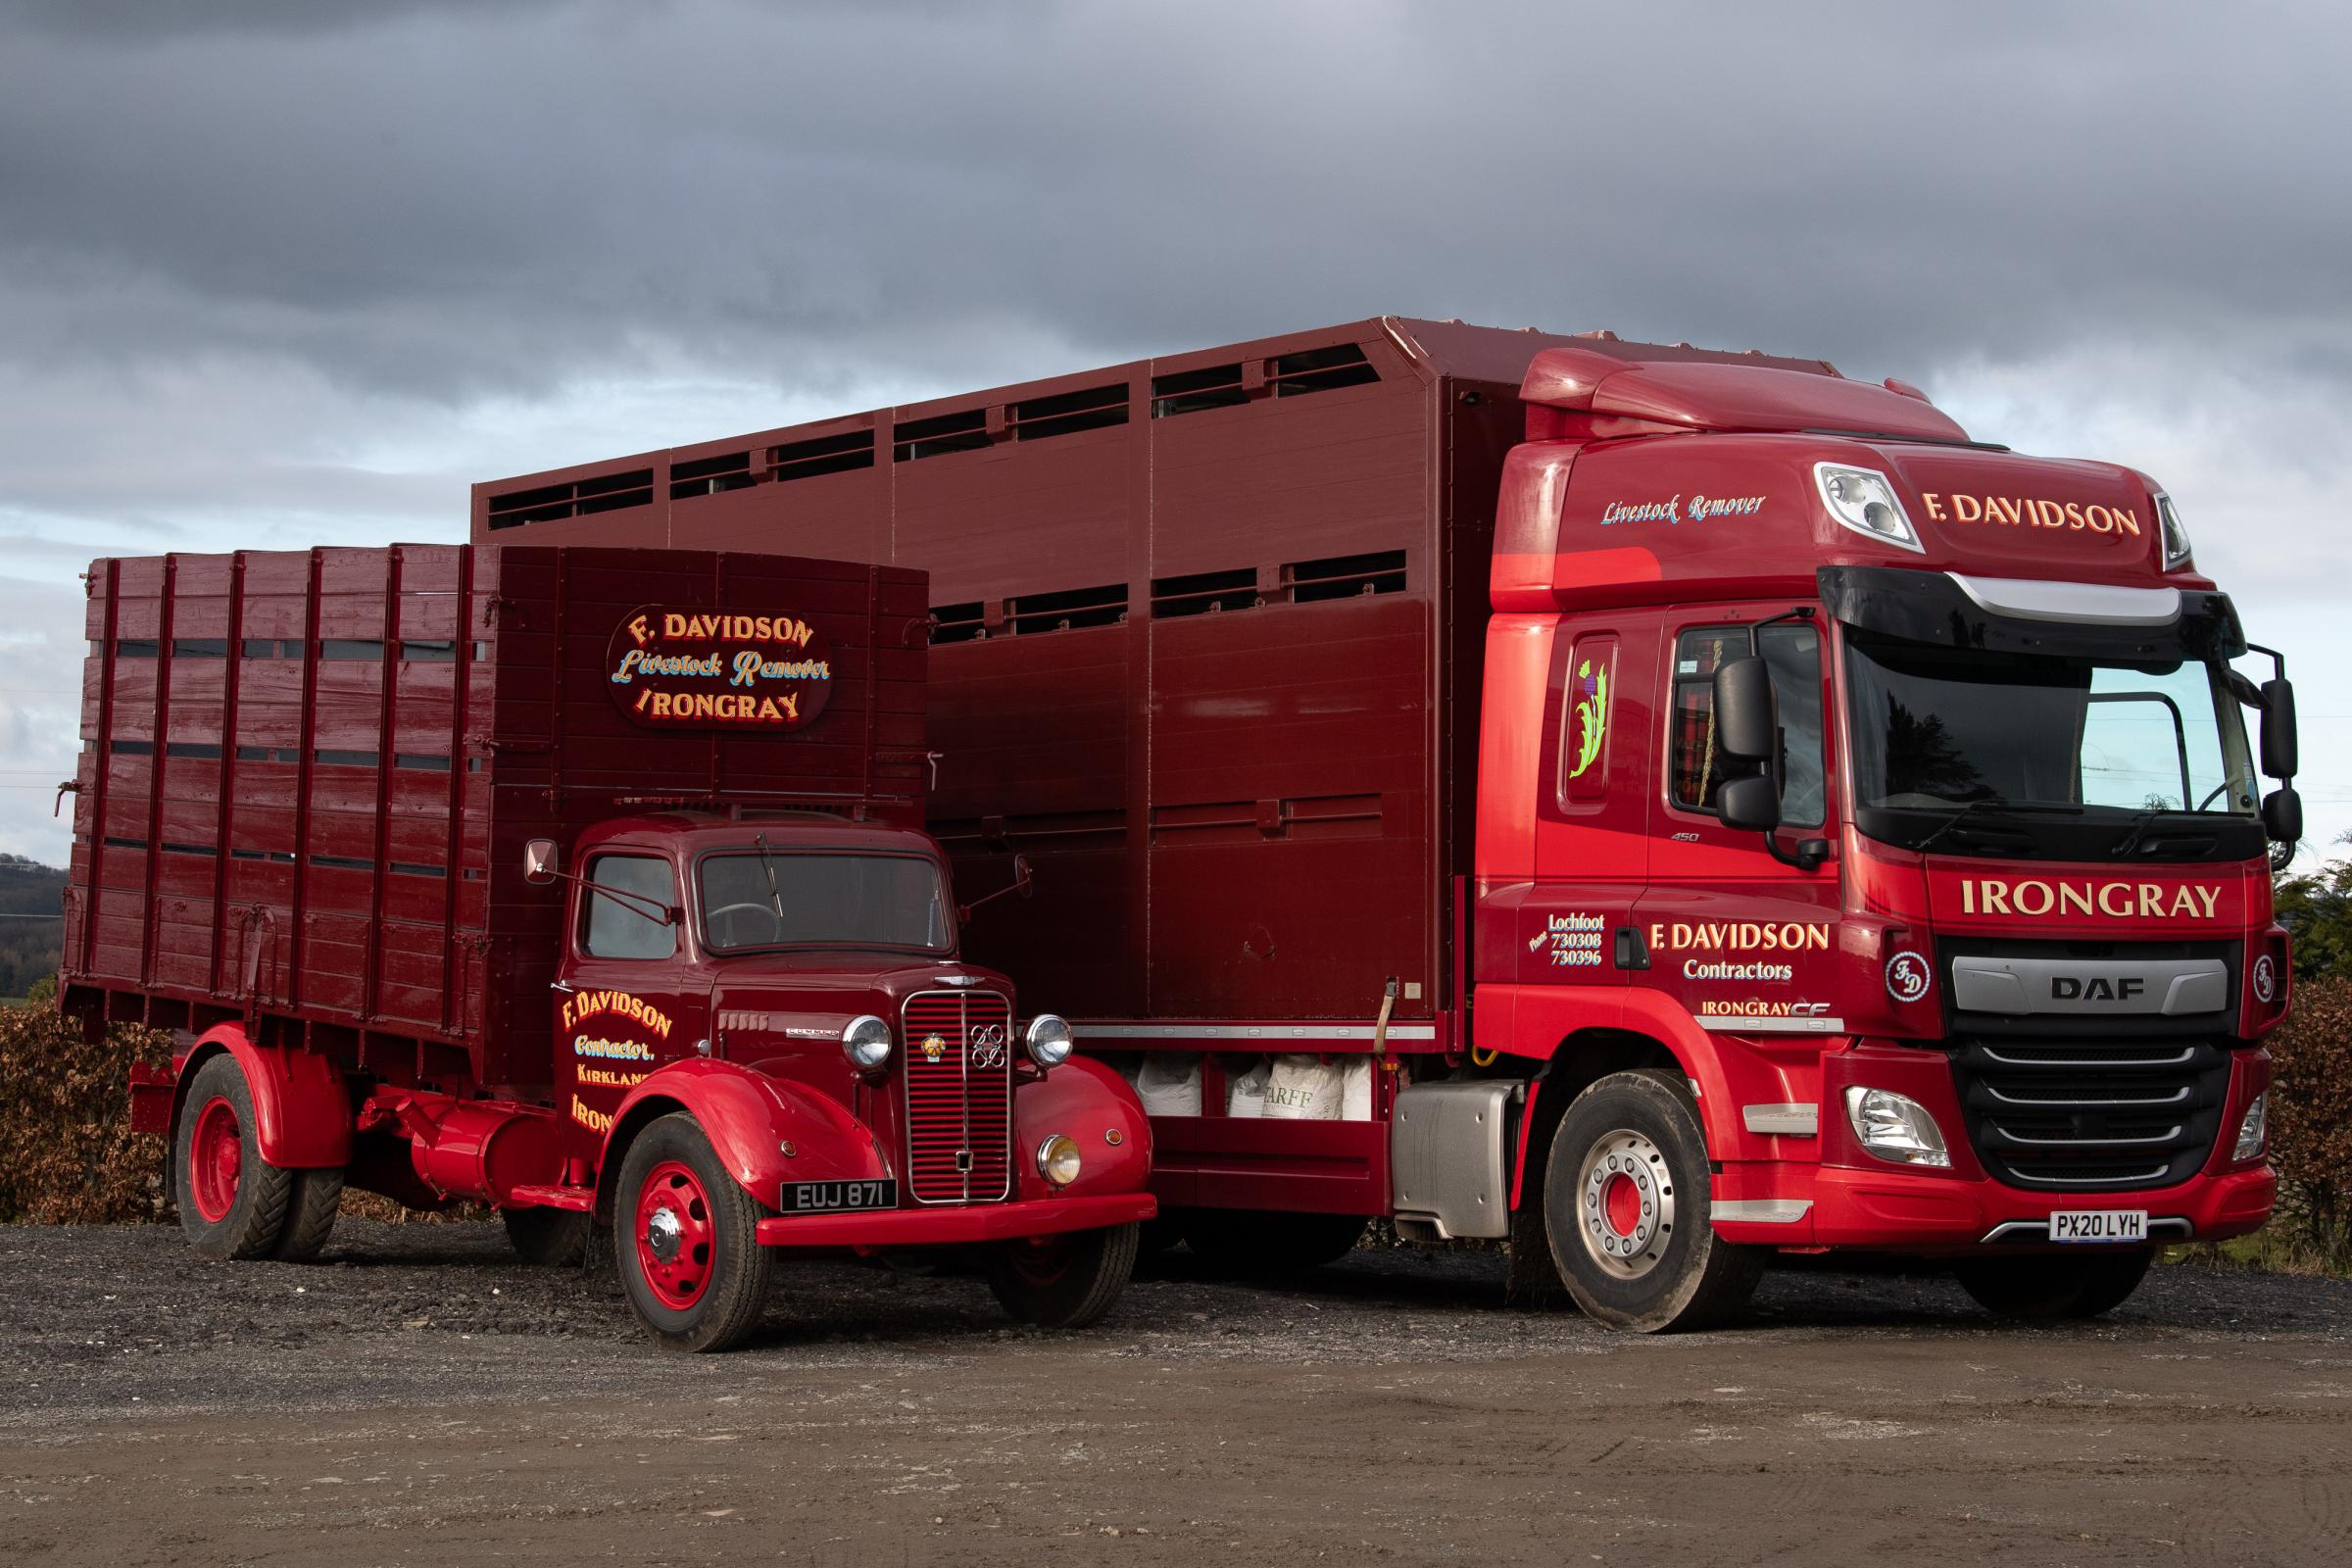  old and the new, the Commer Superpoise next to the modern DAF CF rigid lorry Ref:RH300121263 Rob Haining / The Scottish Farmer...